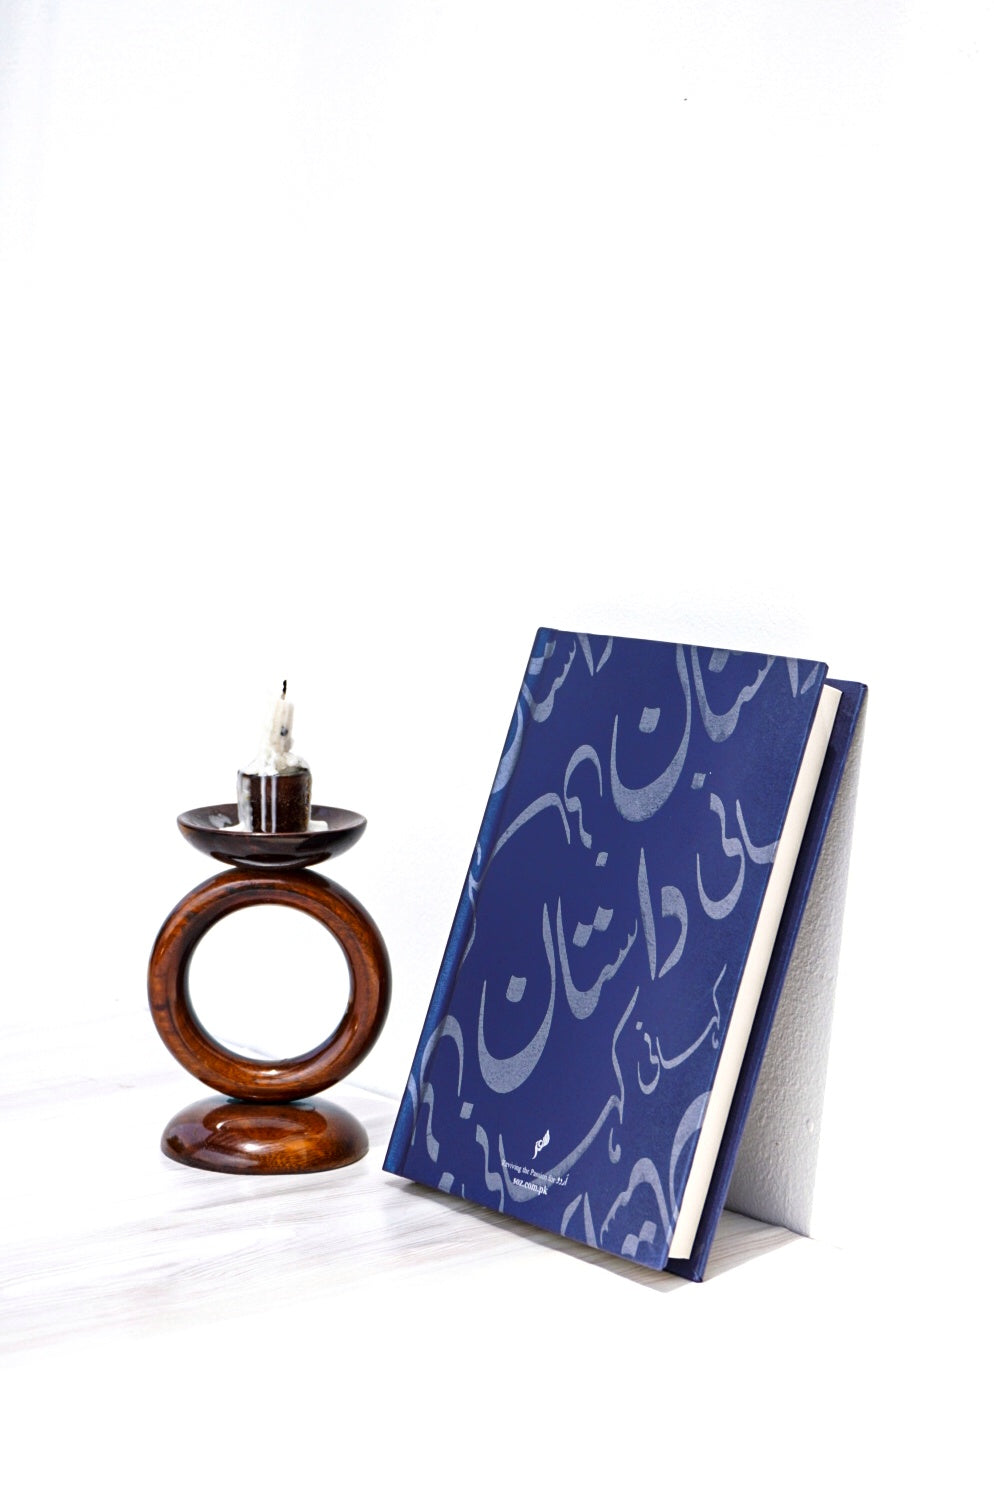 Dastaan -A5 Lined-Hardback Diary